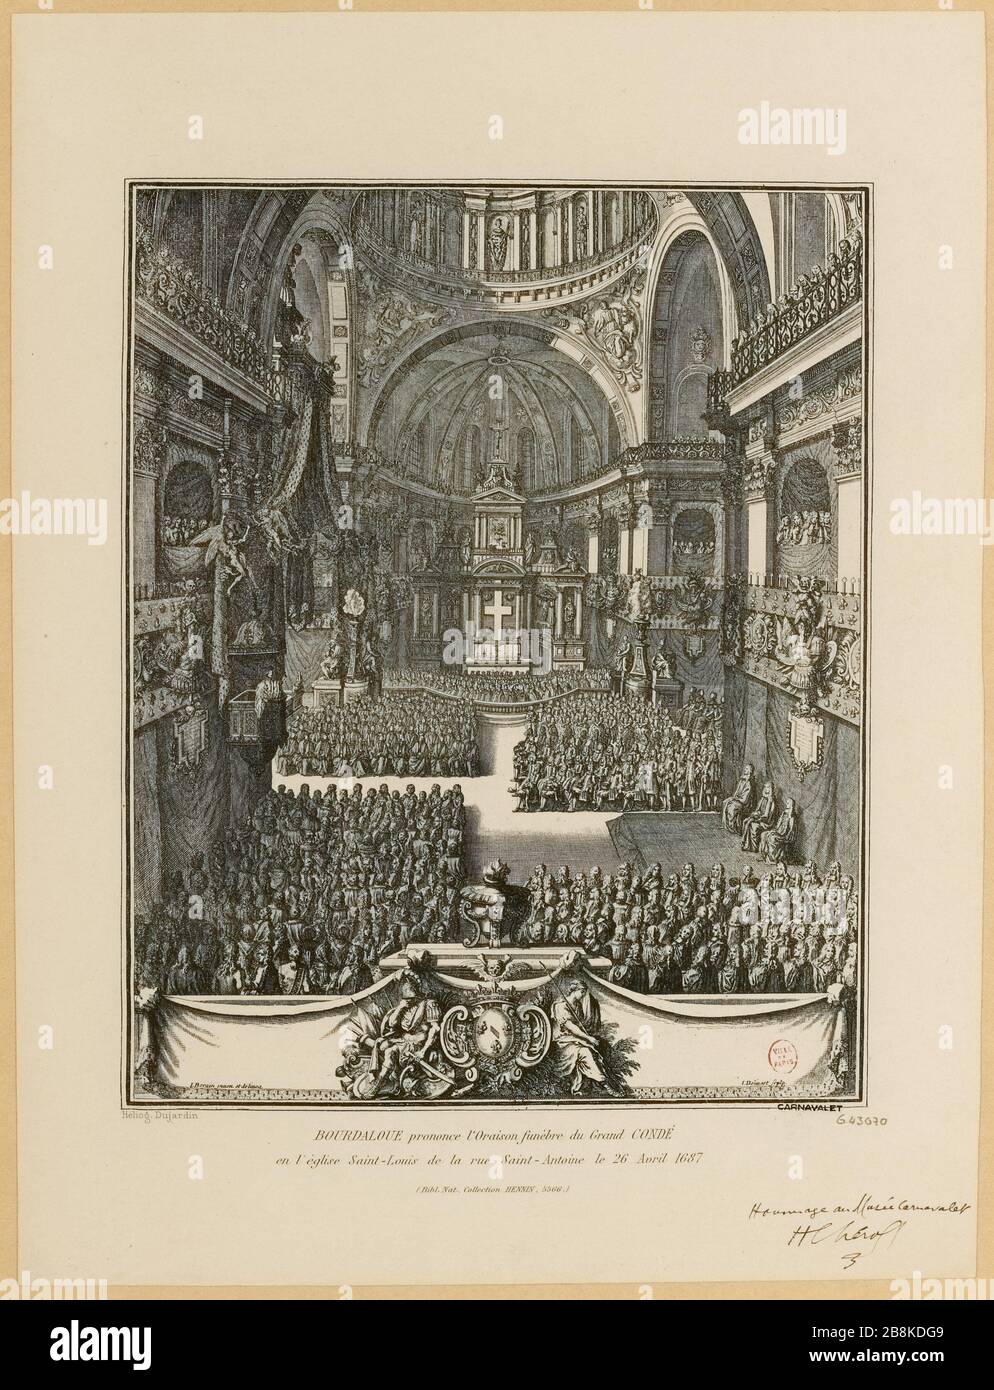 Bourdaloue delivered the funeral oration of the Grand Condé / in the church of Saint Louis rue Saint-Antoine 26 April 1687. (TI) Stock Photo